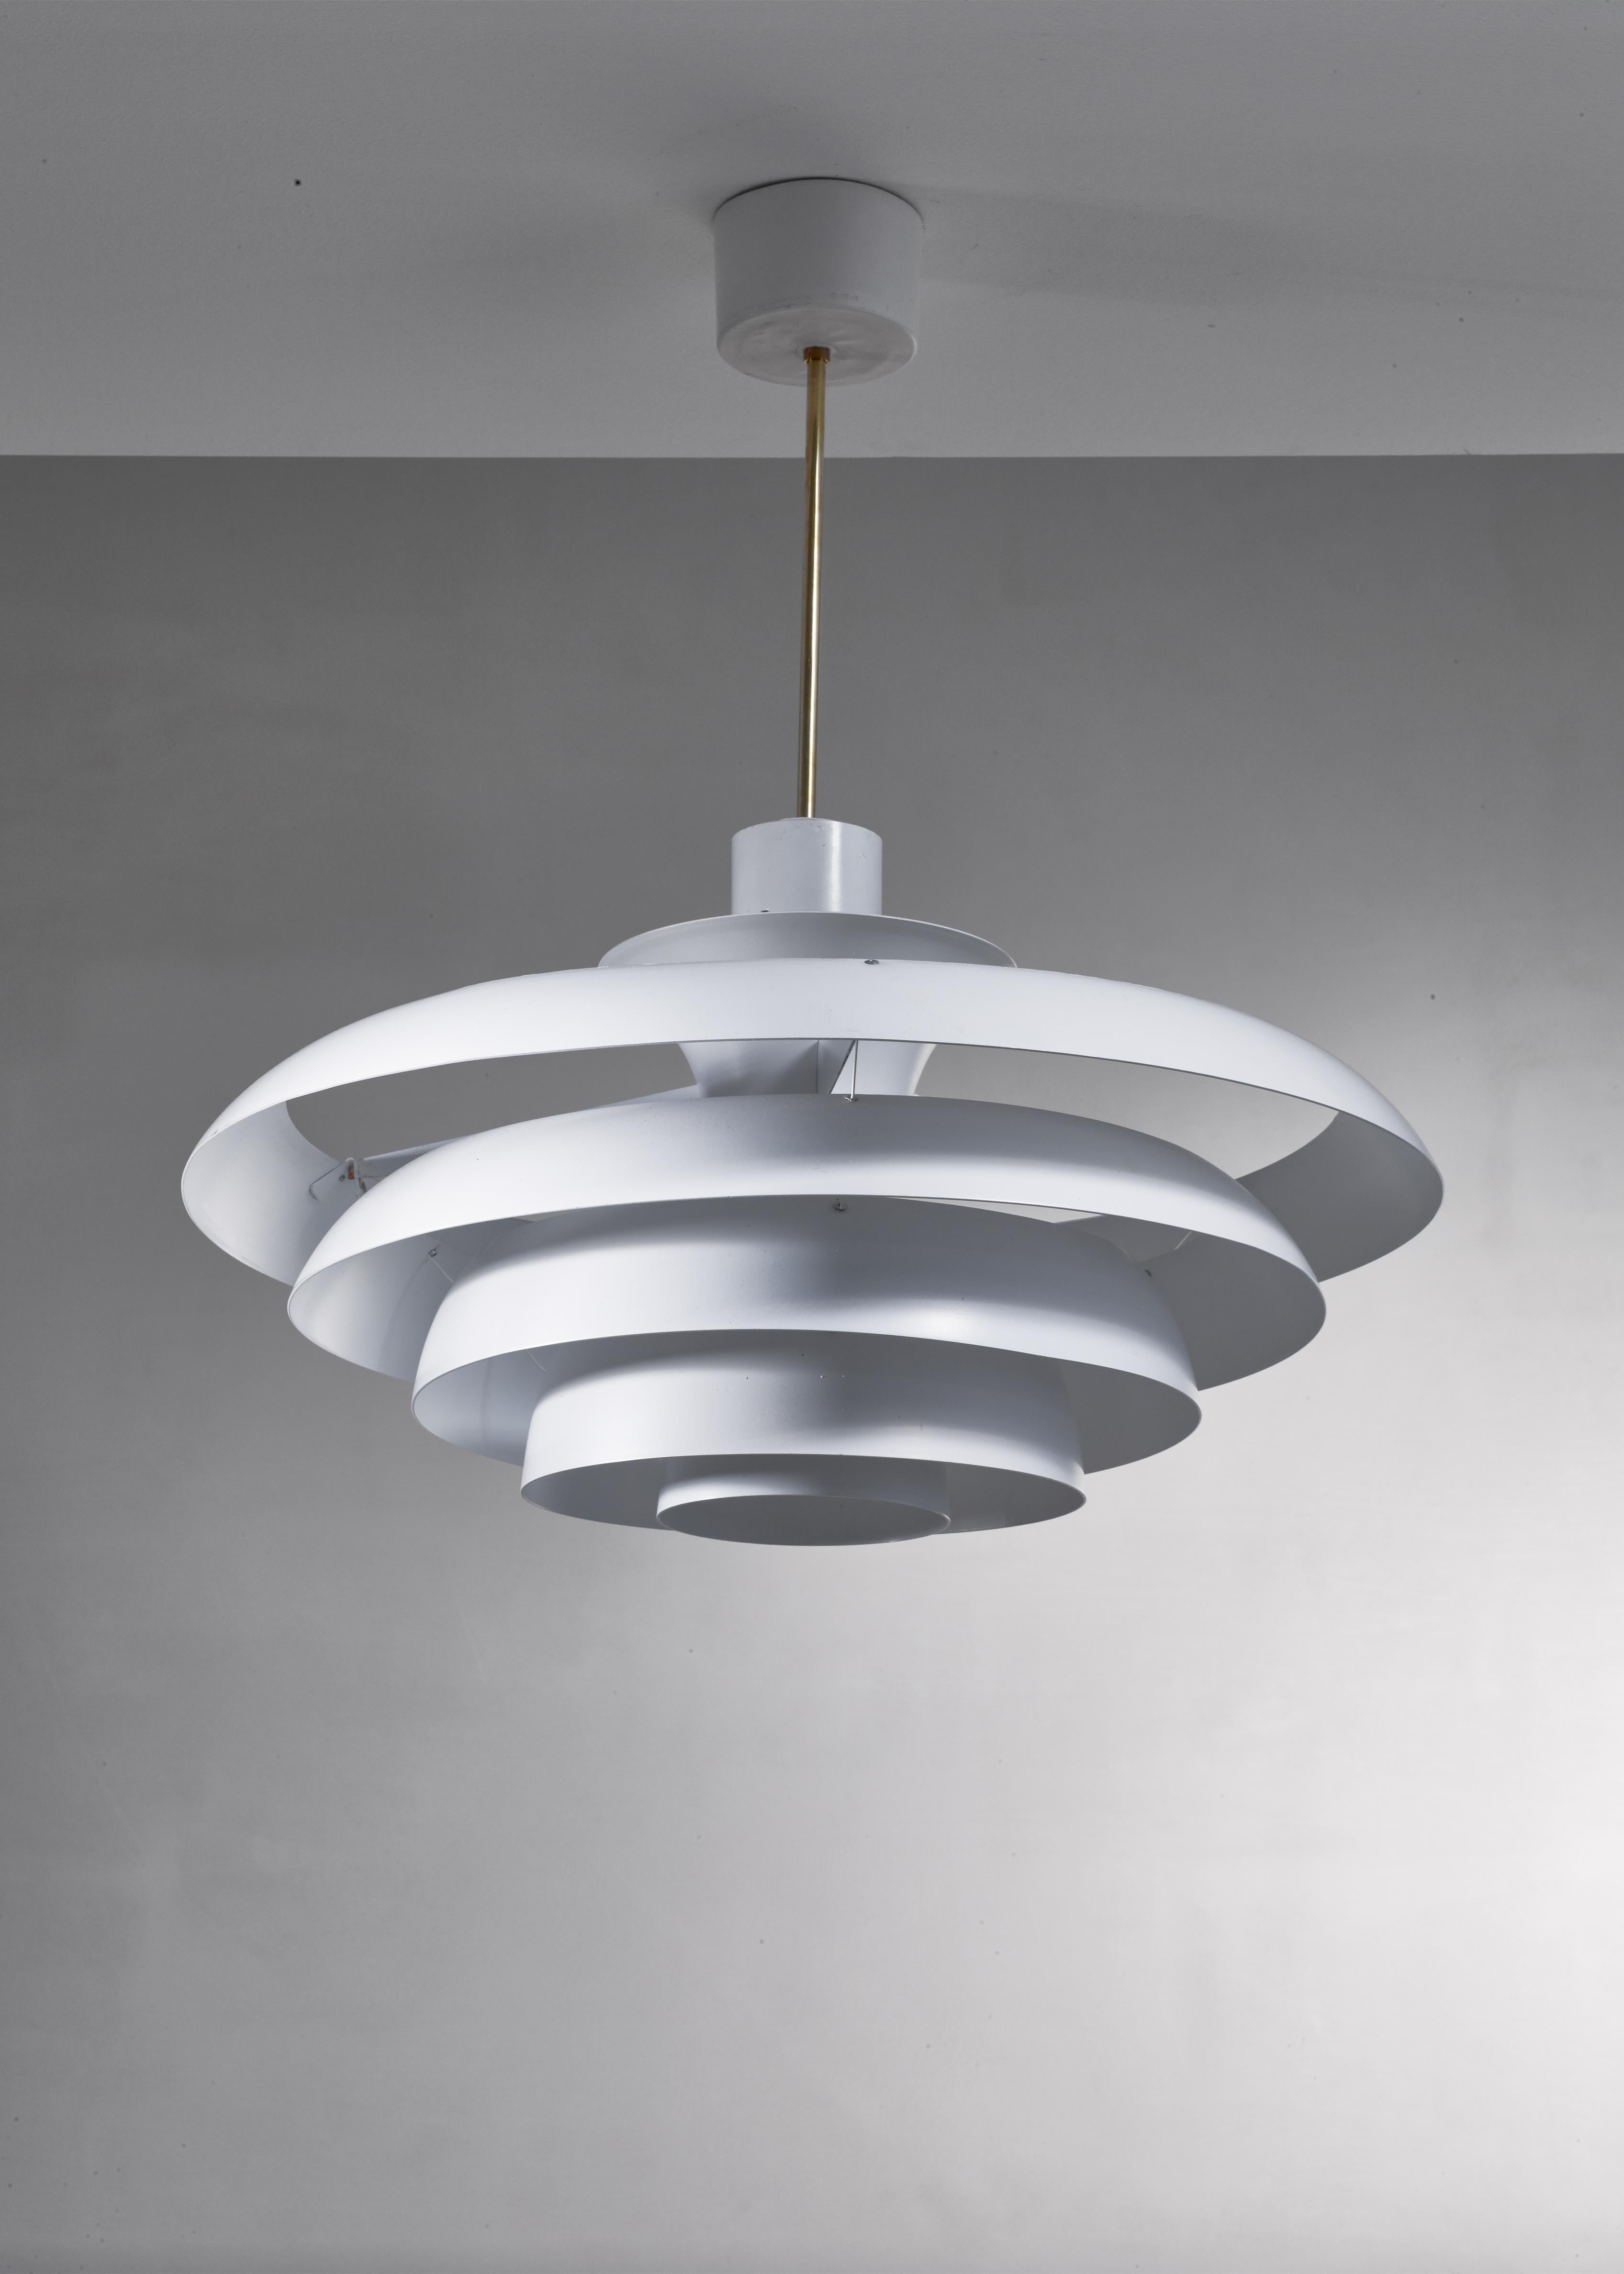 A Fagerhults pendant lamp made of five white lacquered concentric rings of metal, hanging from a brass stem.

The measurements stated are of the shade. On request, the drop can be adjusted to your requirements. 


Available per piece. Total of